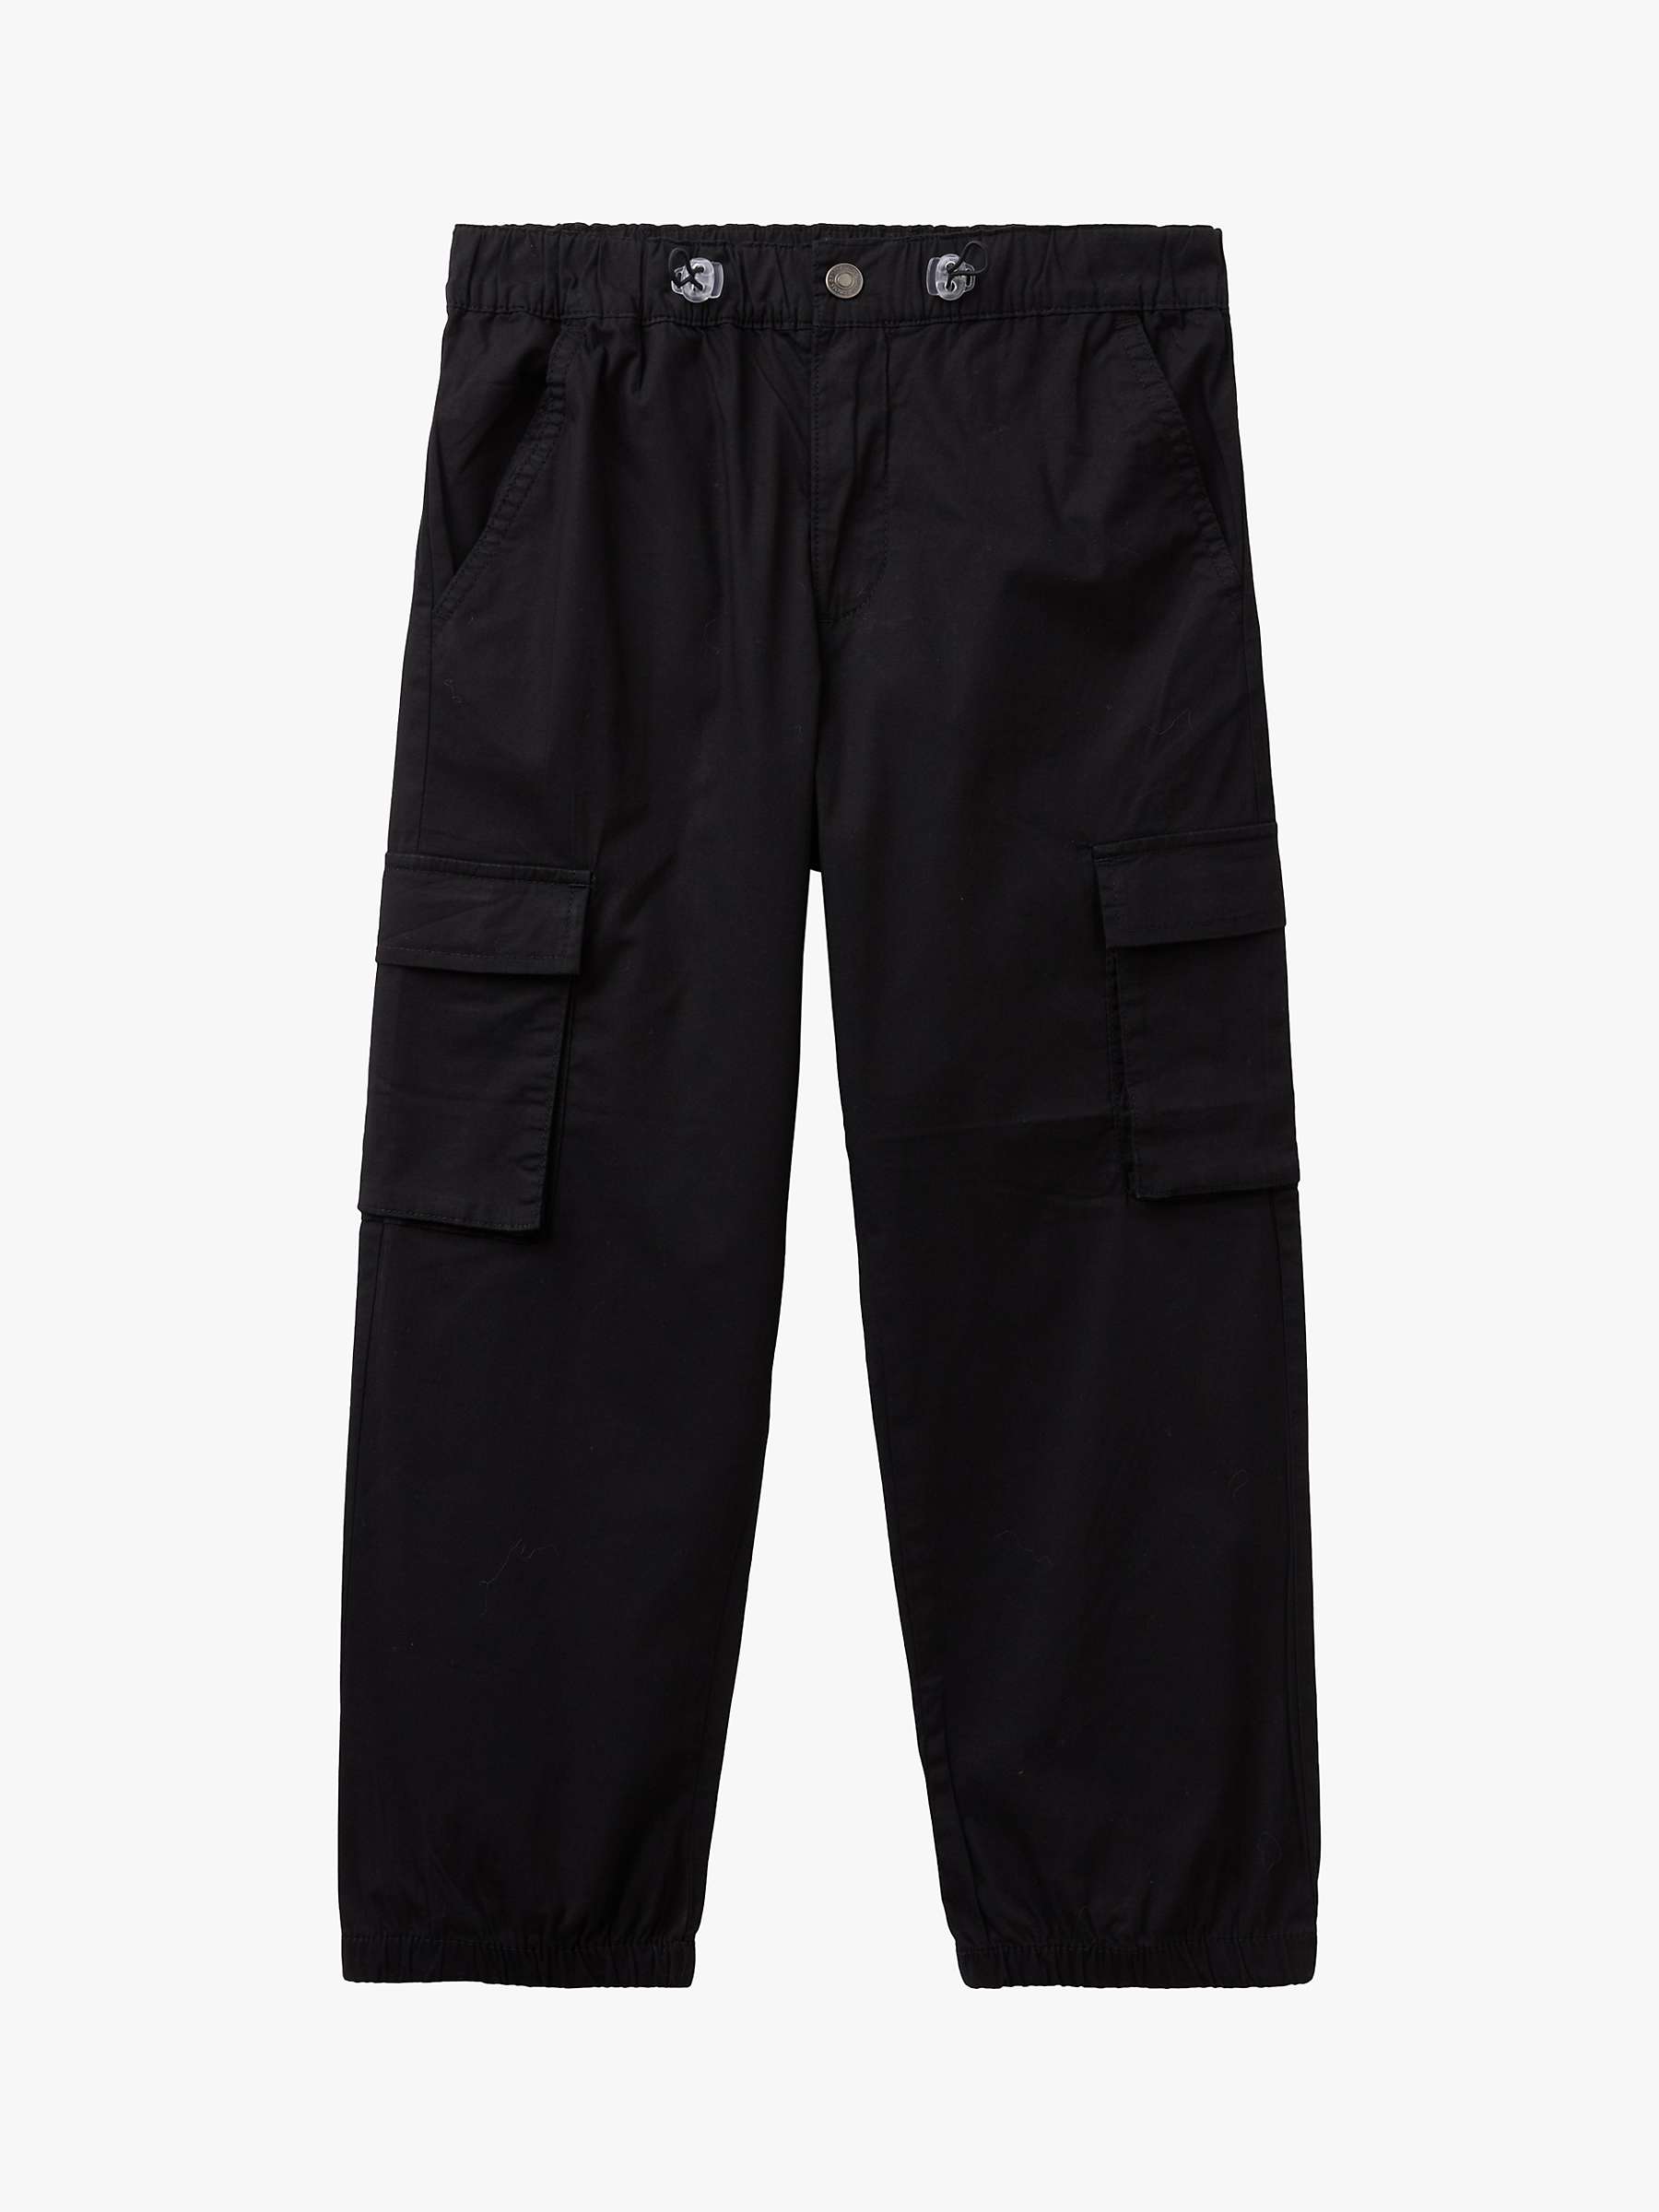 Buy Benetton Kids' Cargo Trousers Online at johnlewis.com